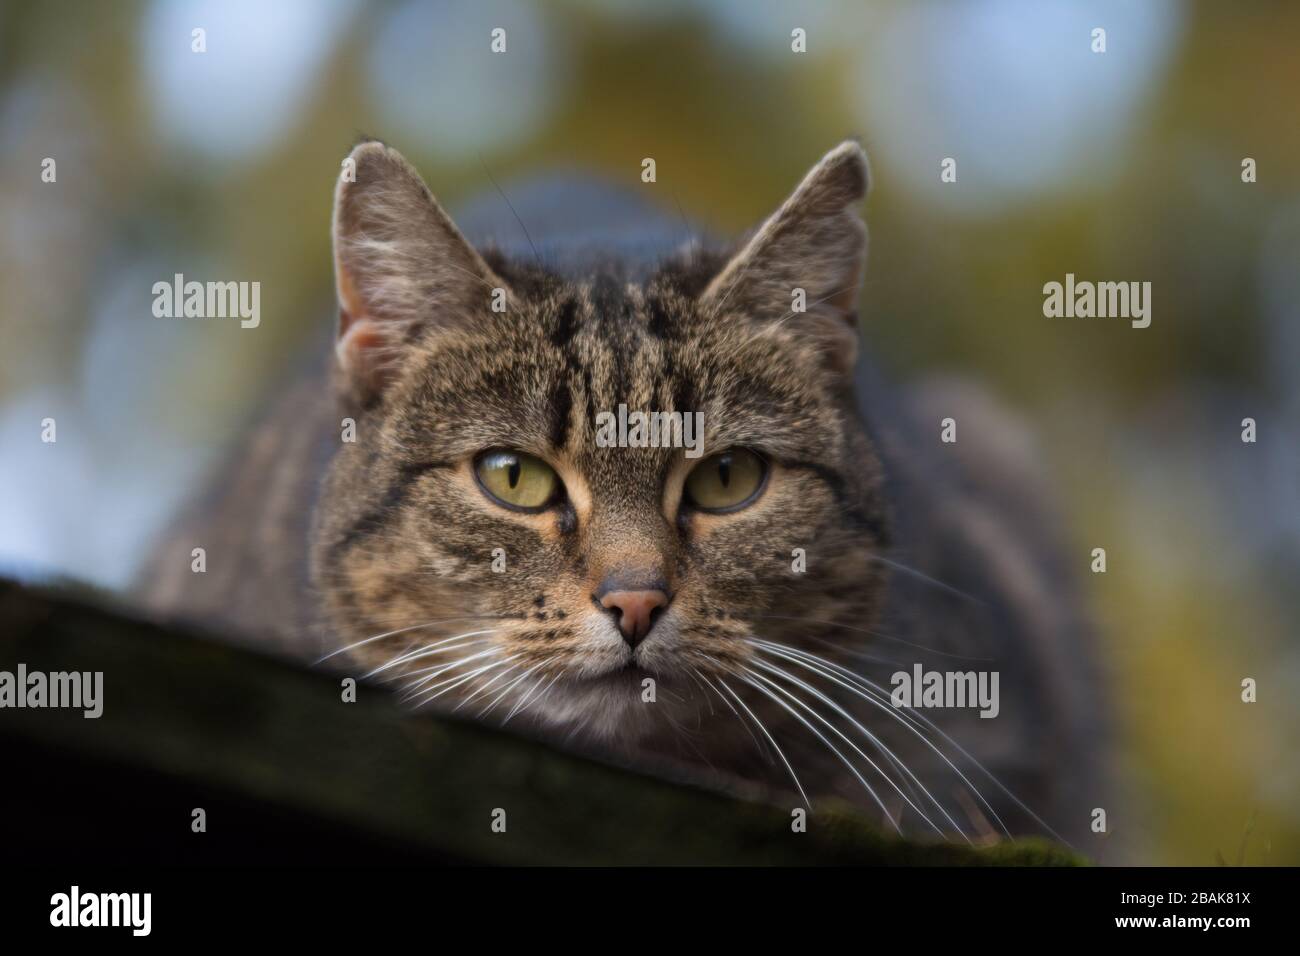 Close-up of a sprayed tabby cat alert watching something Stock Photo